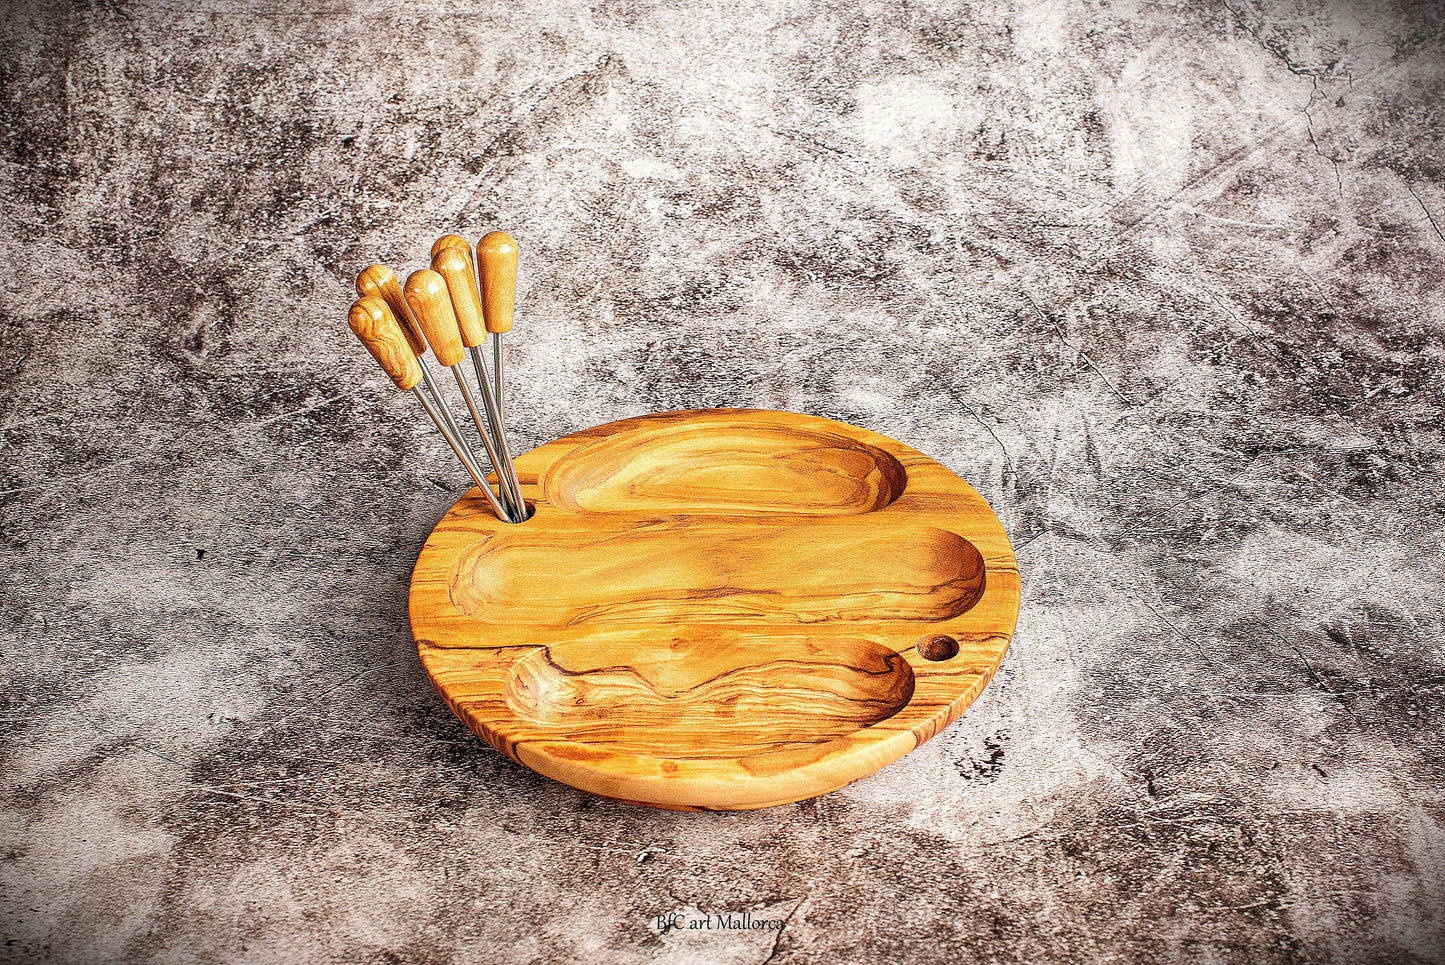 Plate Olive Wood Appetizers 3 departments, Plate With Skewers For Olives and Pipes, Sauce Plate, Seasoning Plate, Olive Wood Plate, Fruit